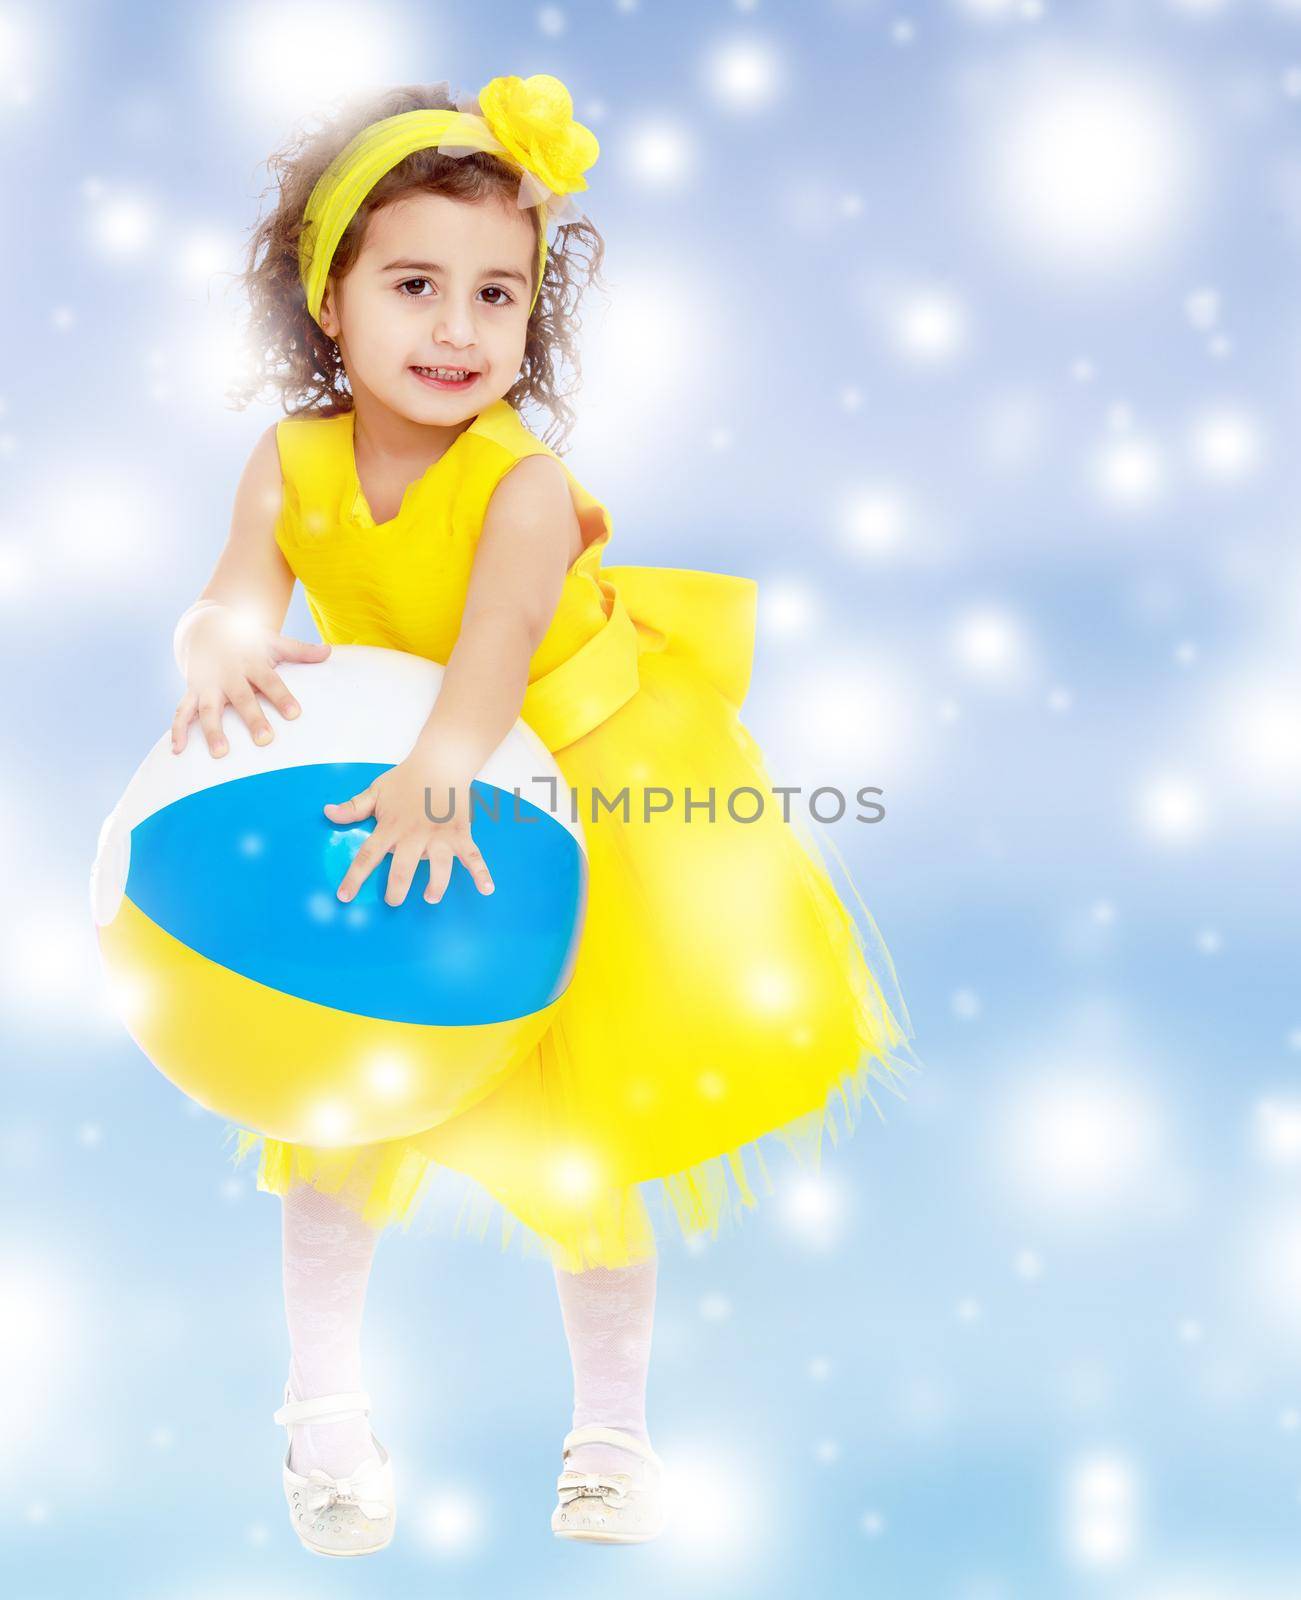 Funny curly baby girl in a bright yellow dress and bow on her head playing with a ball.Blue winter background with white snowflakes.